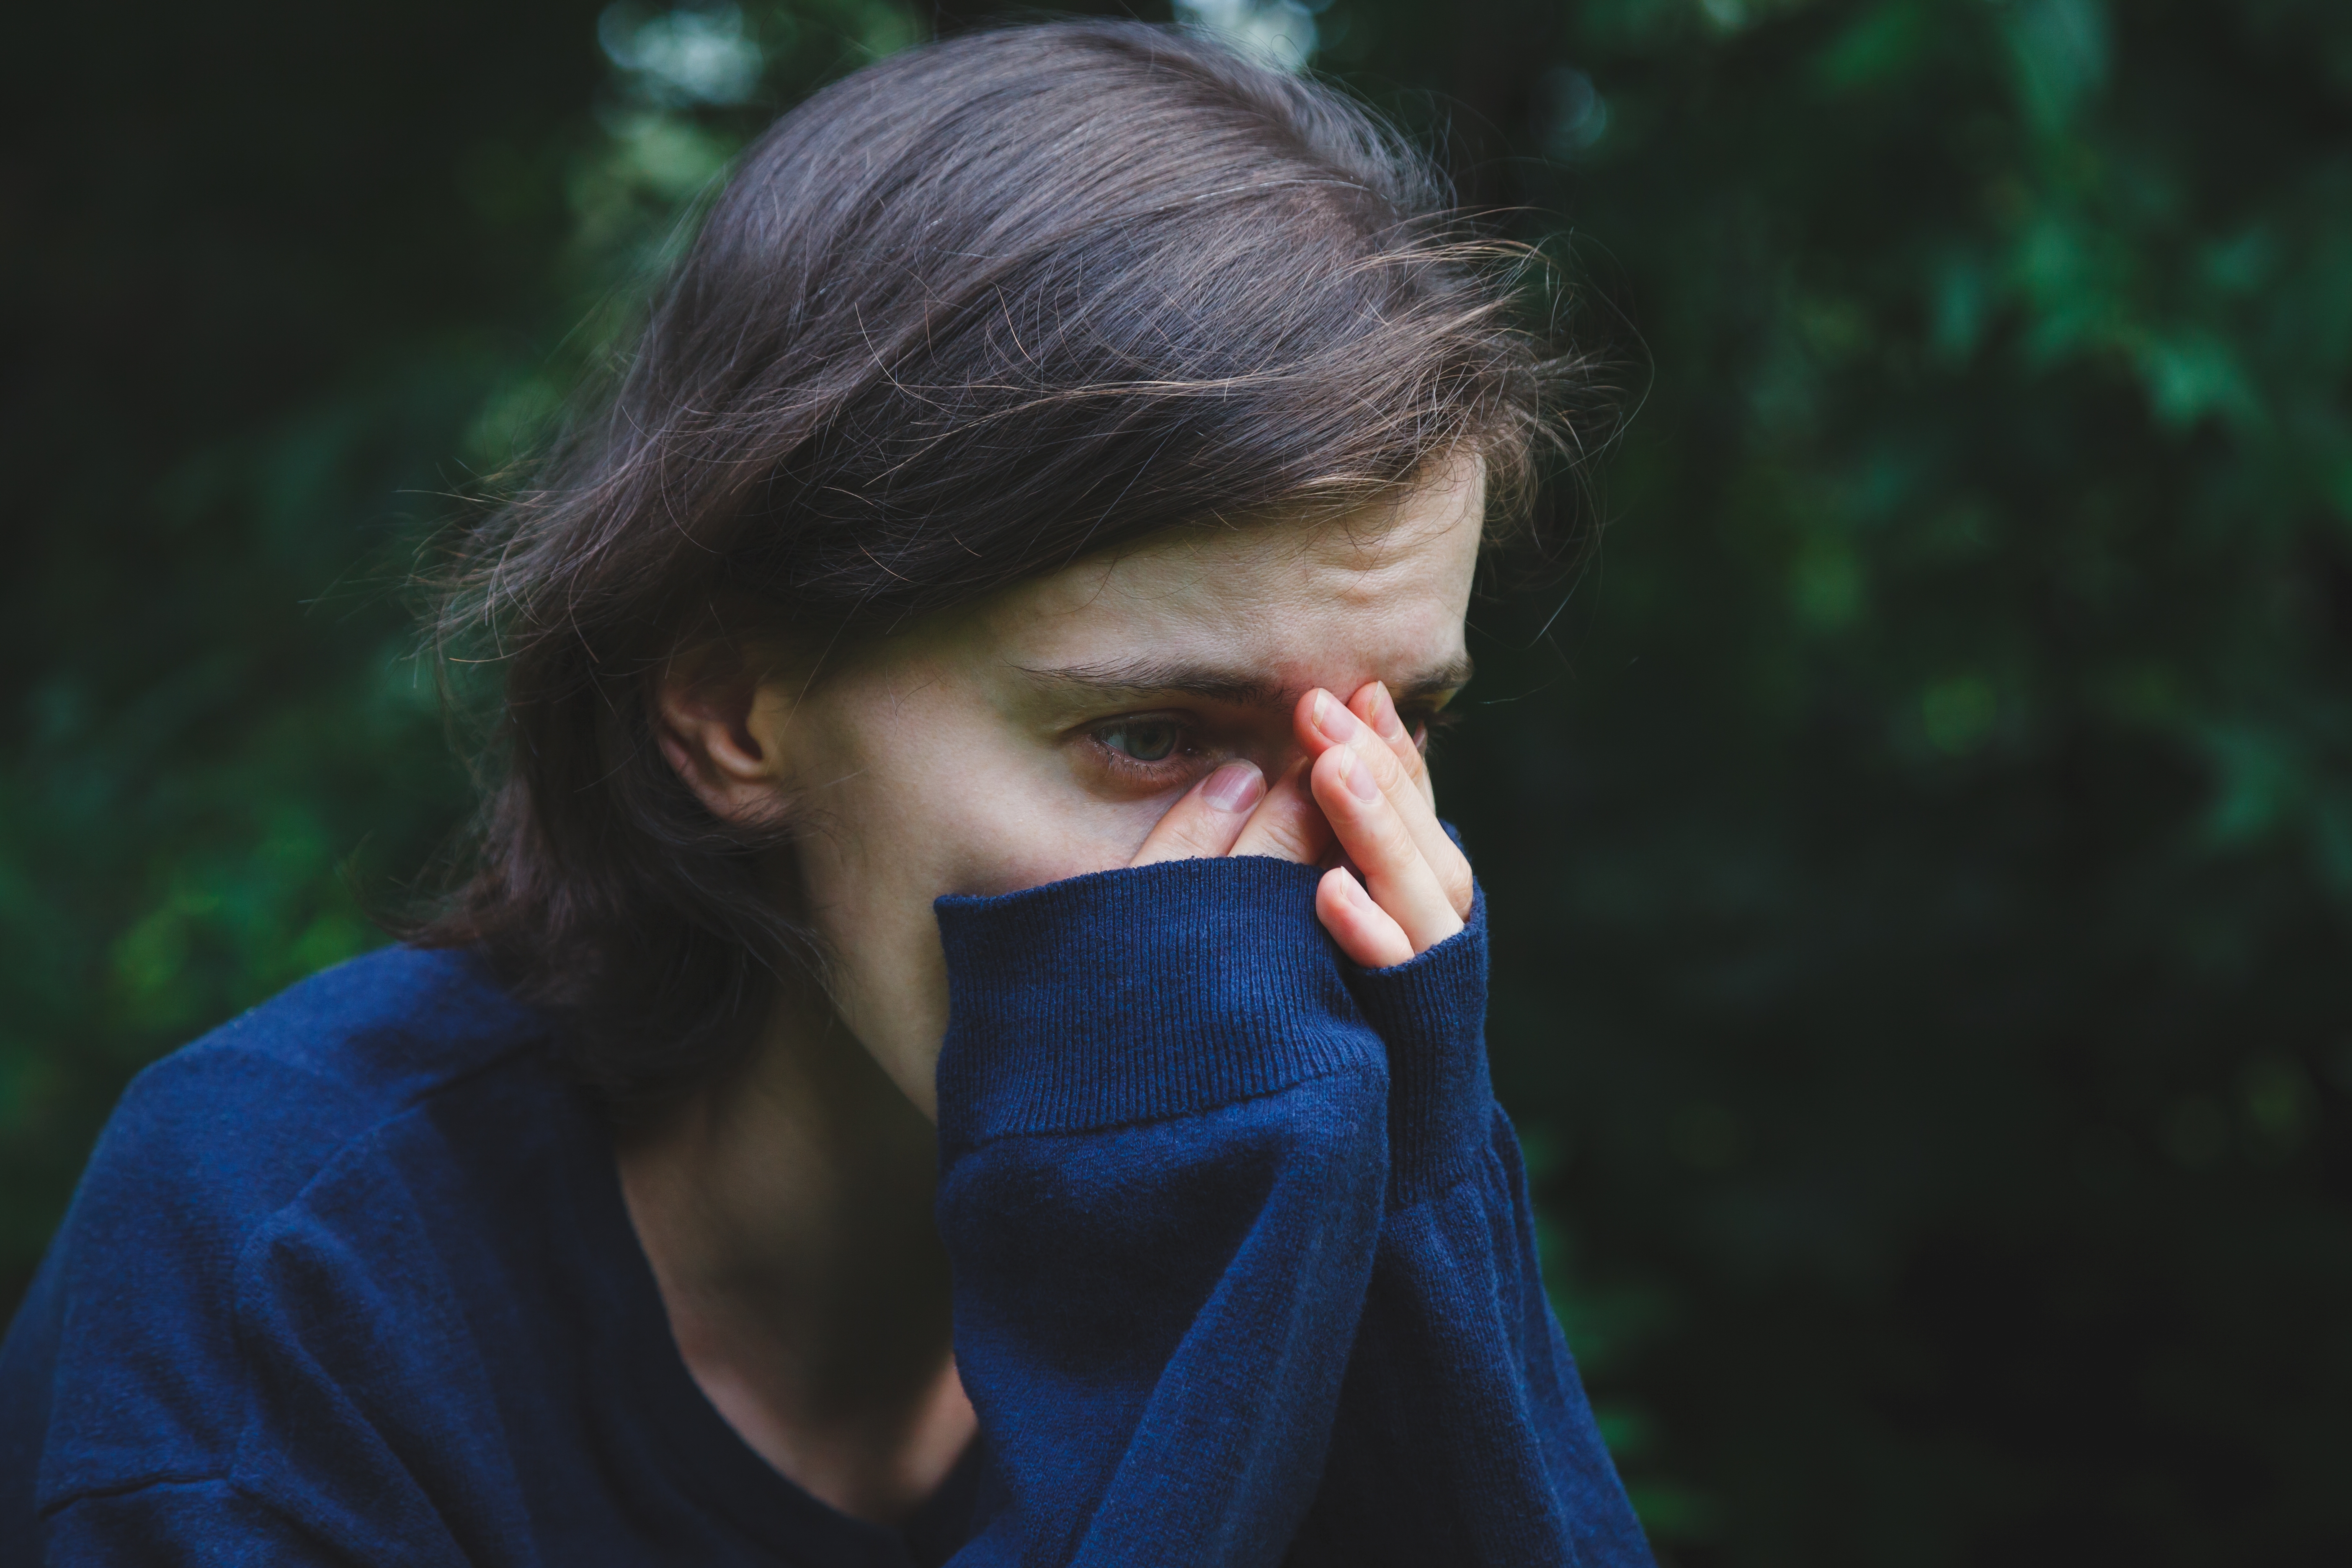 An upset looking woman covering her face with her hands | Source: Shutterstock